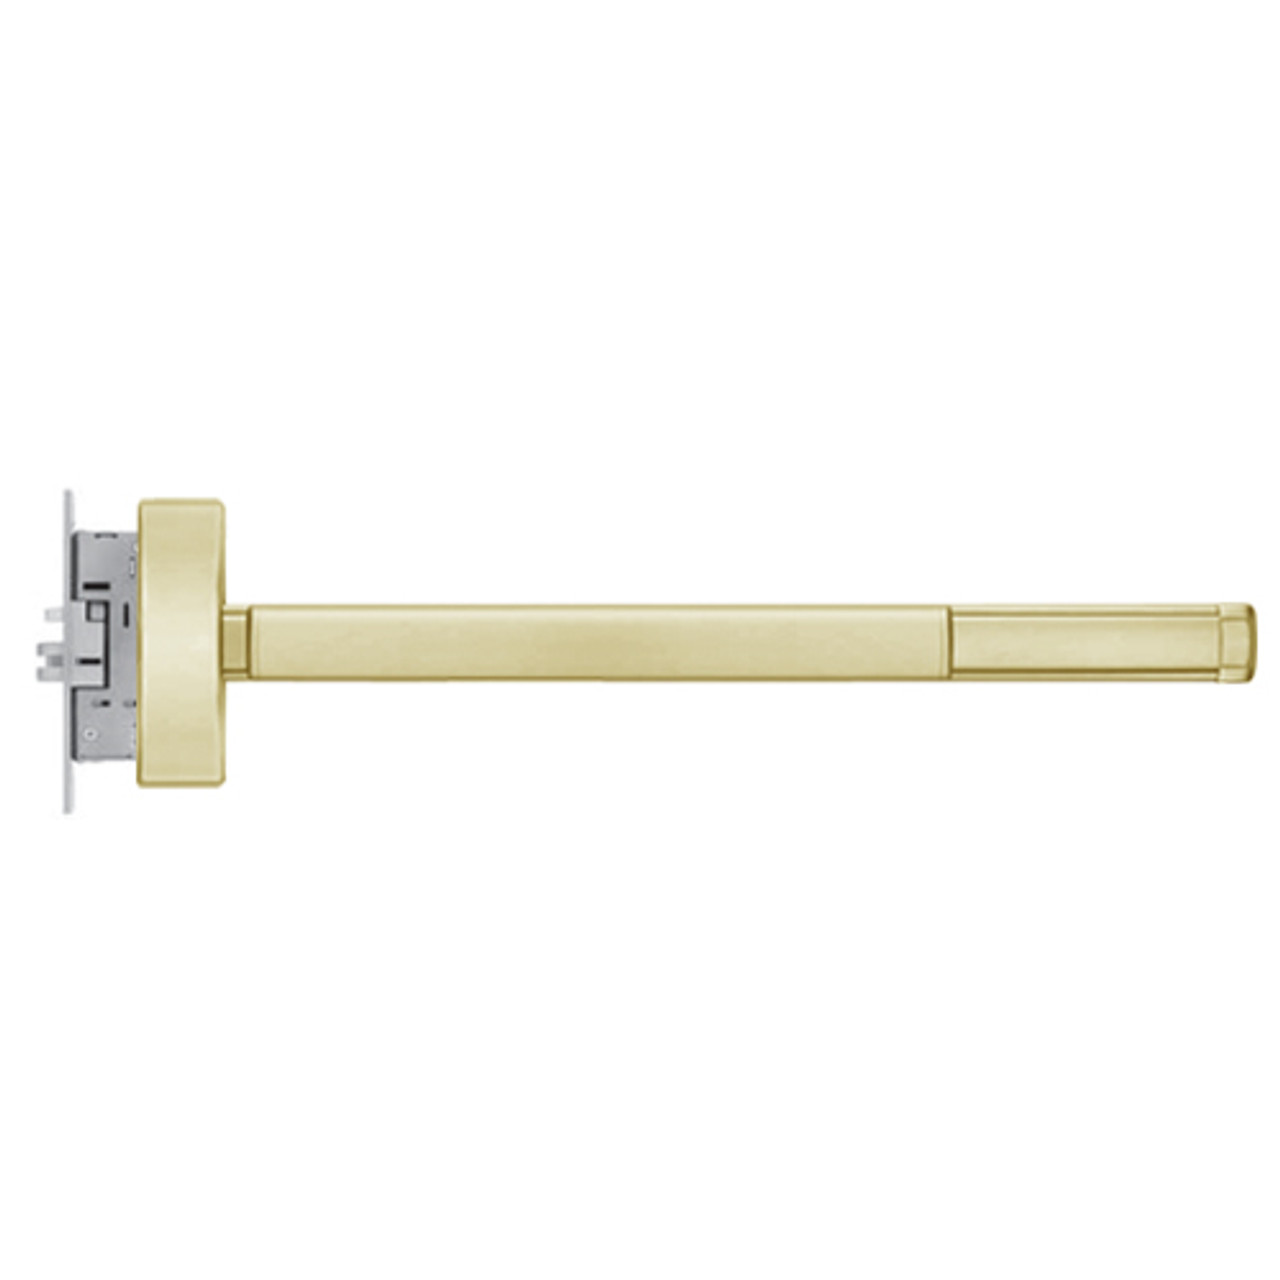 TSFL2305-RHR-606-48 PHI 2300 Series Fire Rated Apex Mortise Exit Device with Touchbar Monitoring Switch Prepped for Key Controls Thumb Piece in Satin Brass Finish